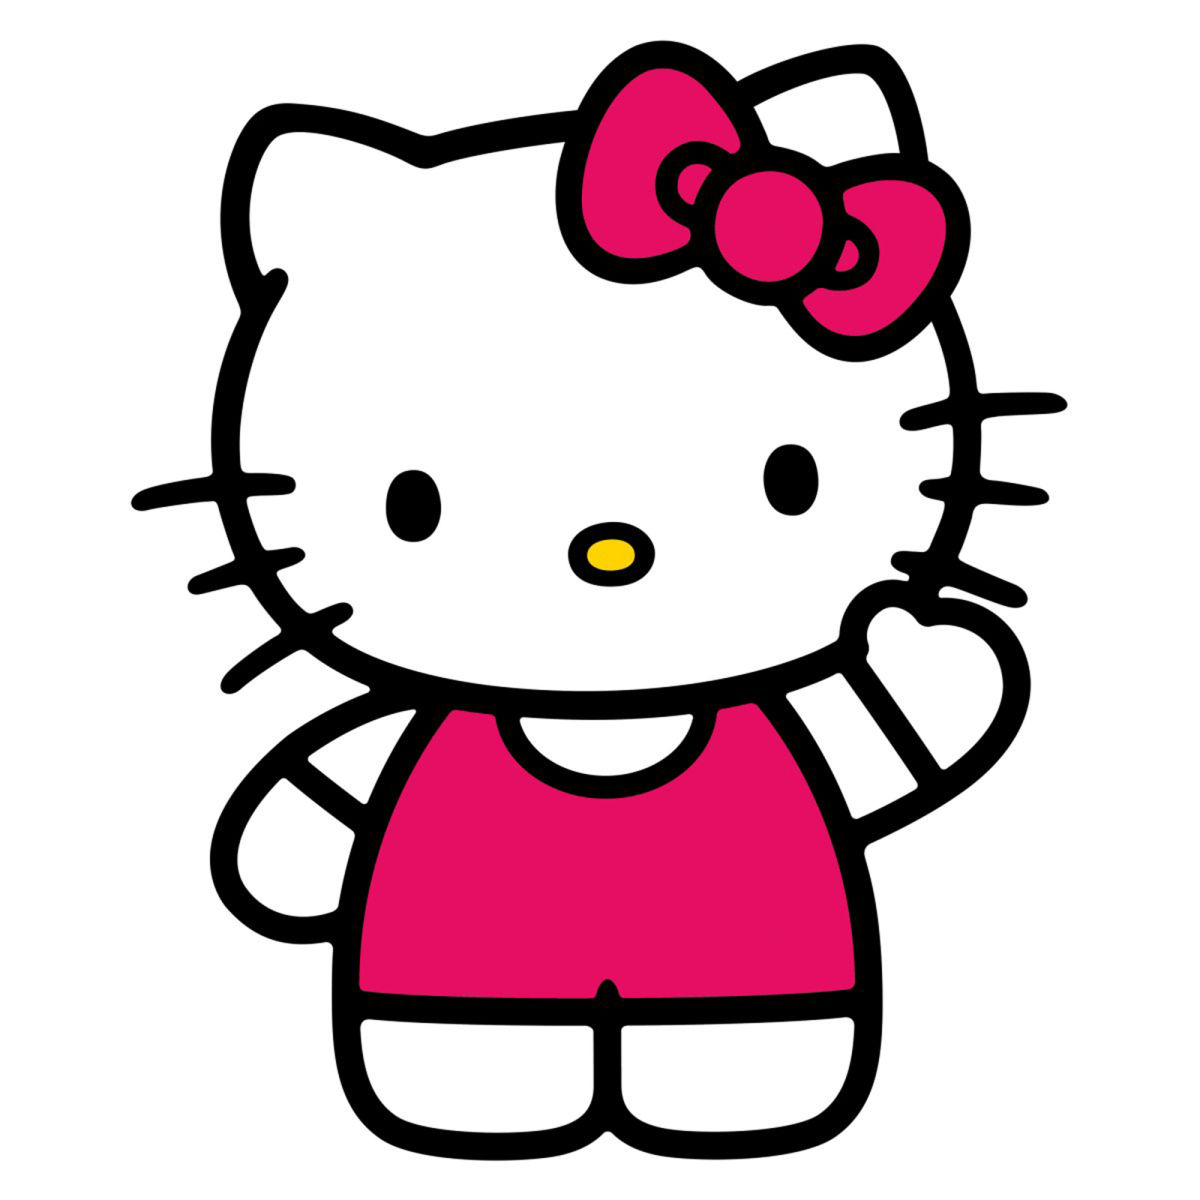 Hello Kitty movie targeted for 2019